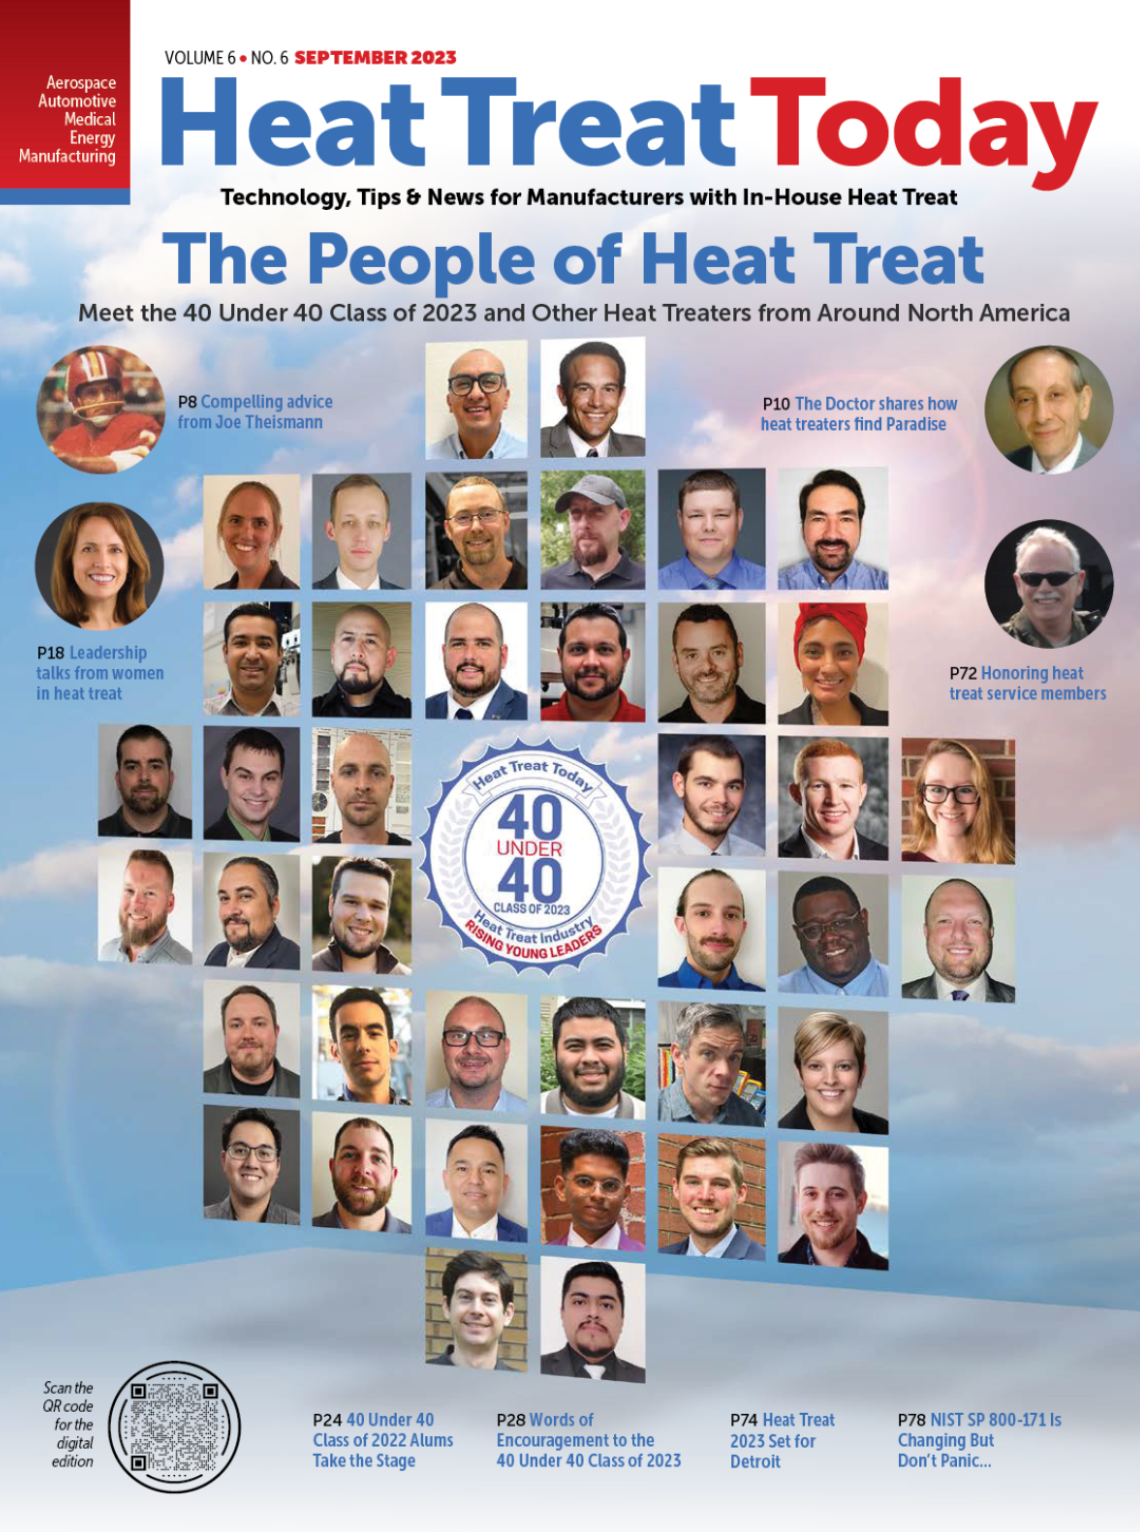 September 2024 Annual 40 Under 40 and 2024 Furnaces North America